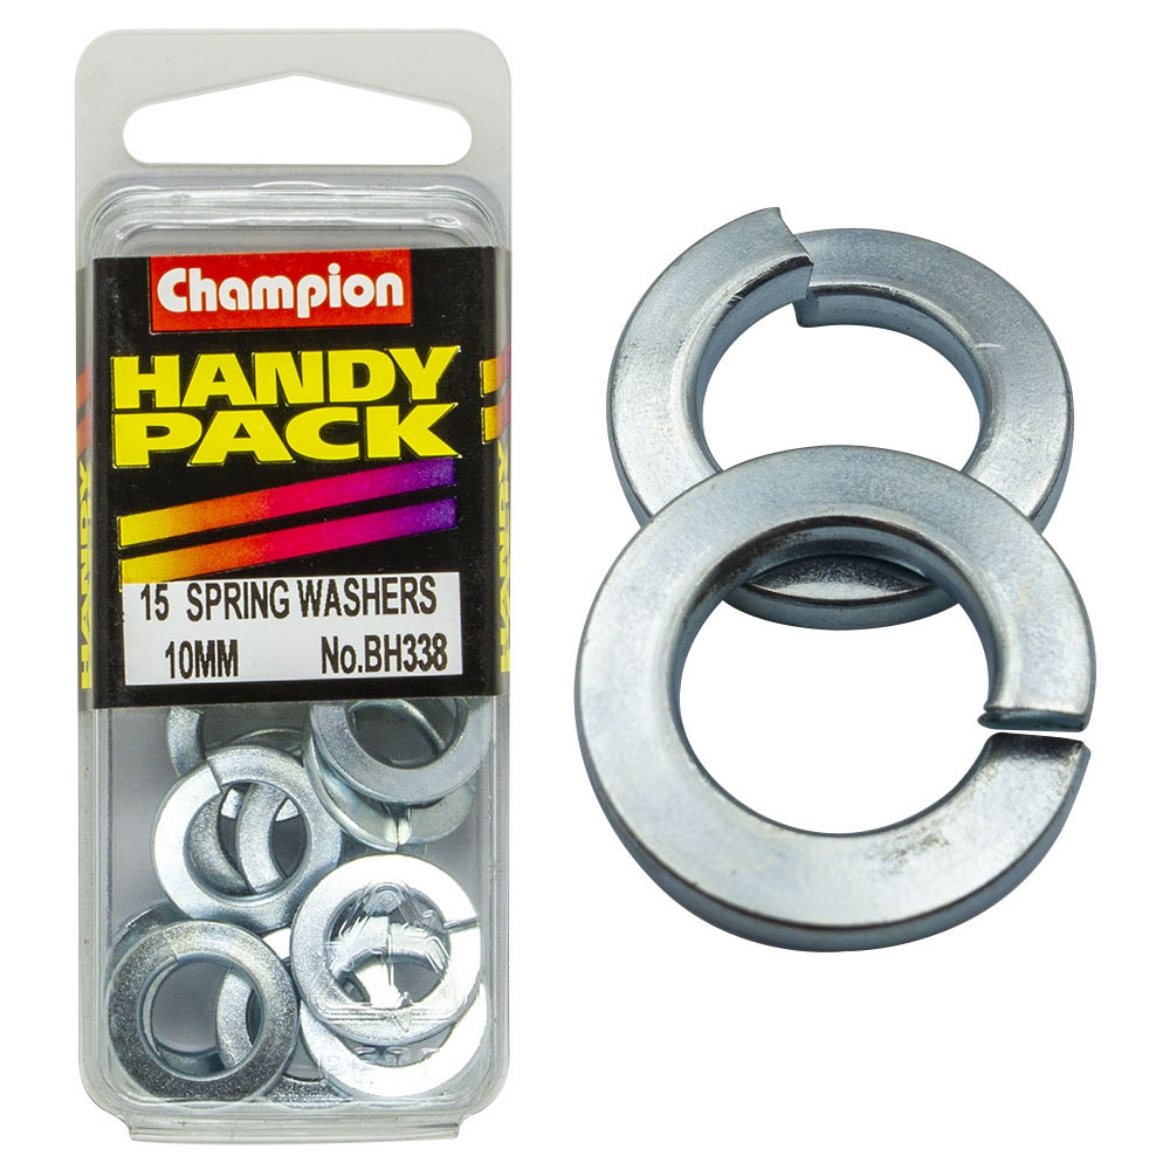 Picture of Handy Pk Spring Washer 10mm WIS (Pkt.15)